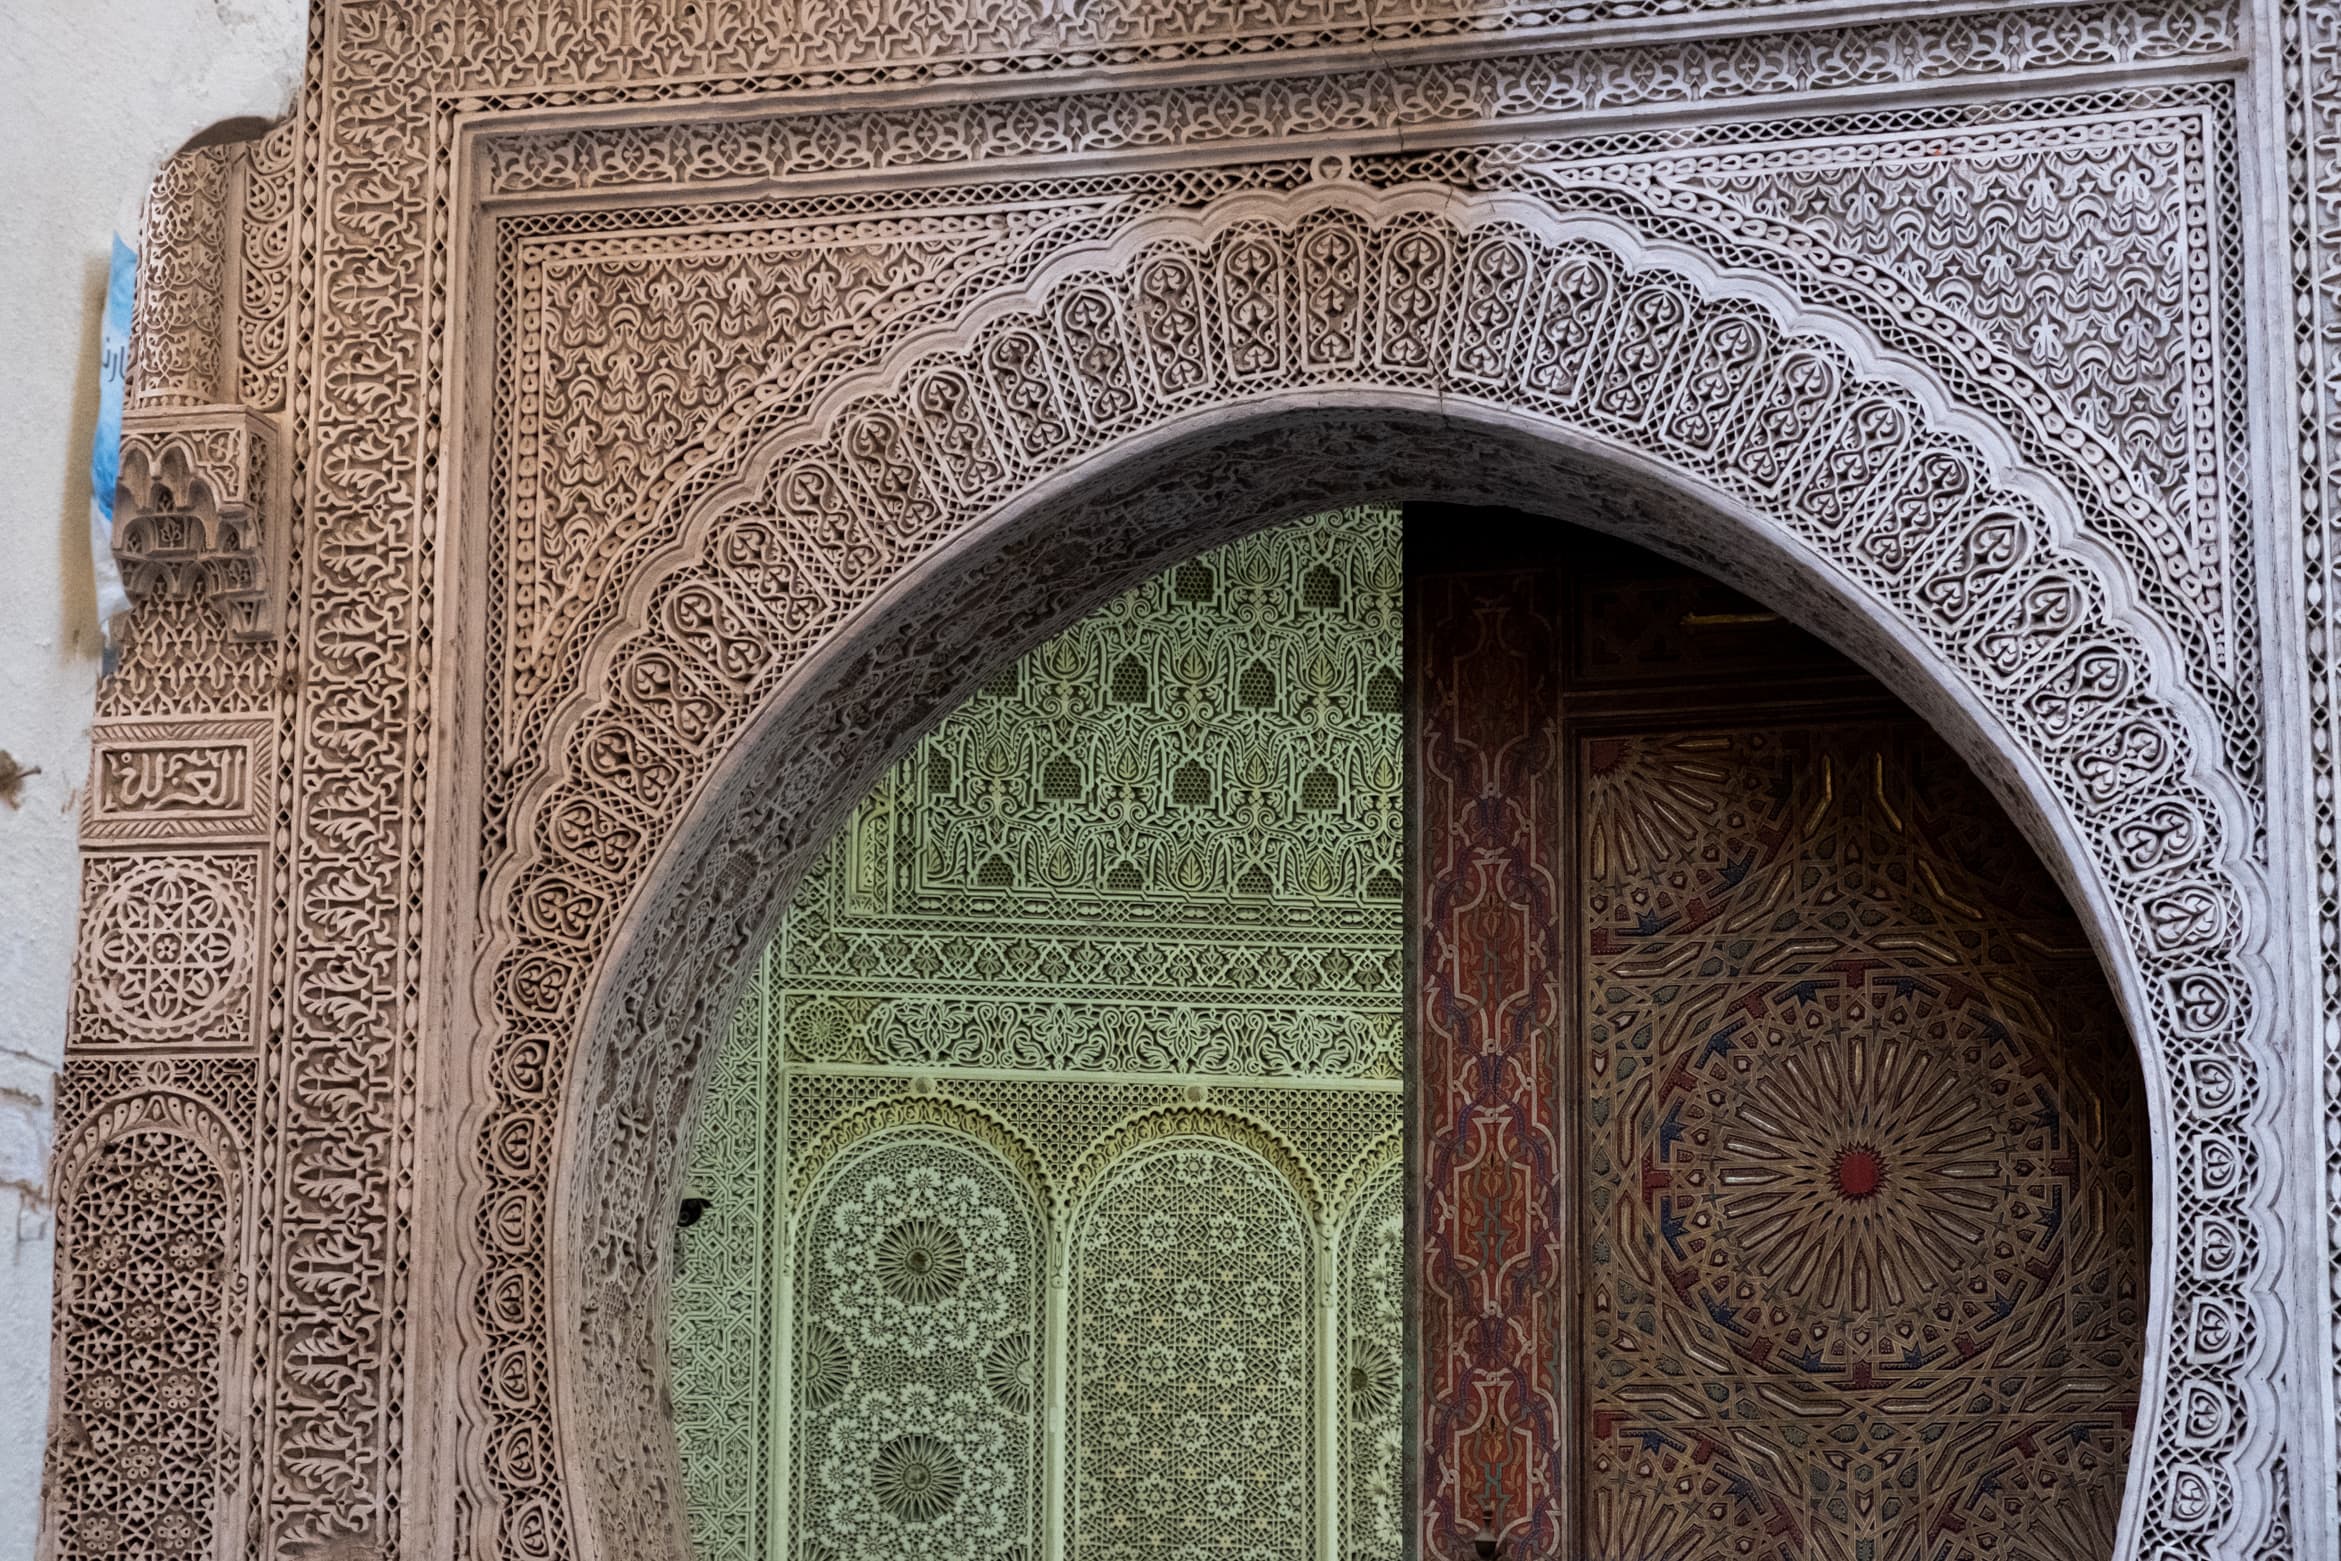 Intricately carved Islamic doorframe and interior in Fex